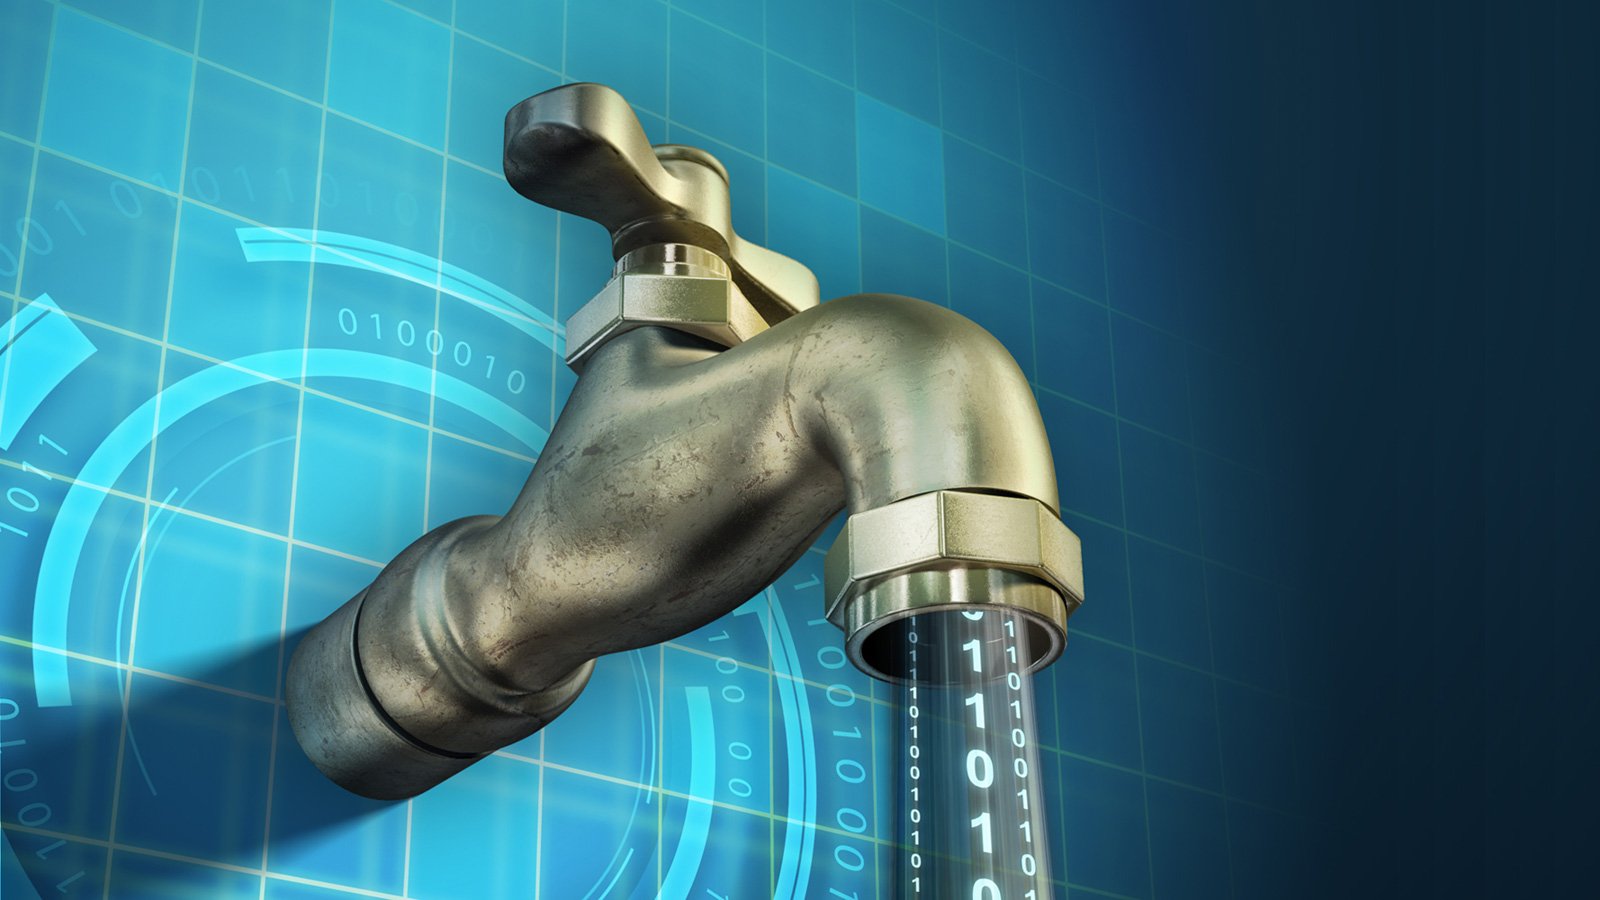 Data leaking from a faucet